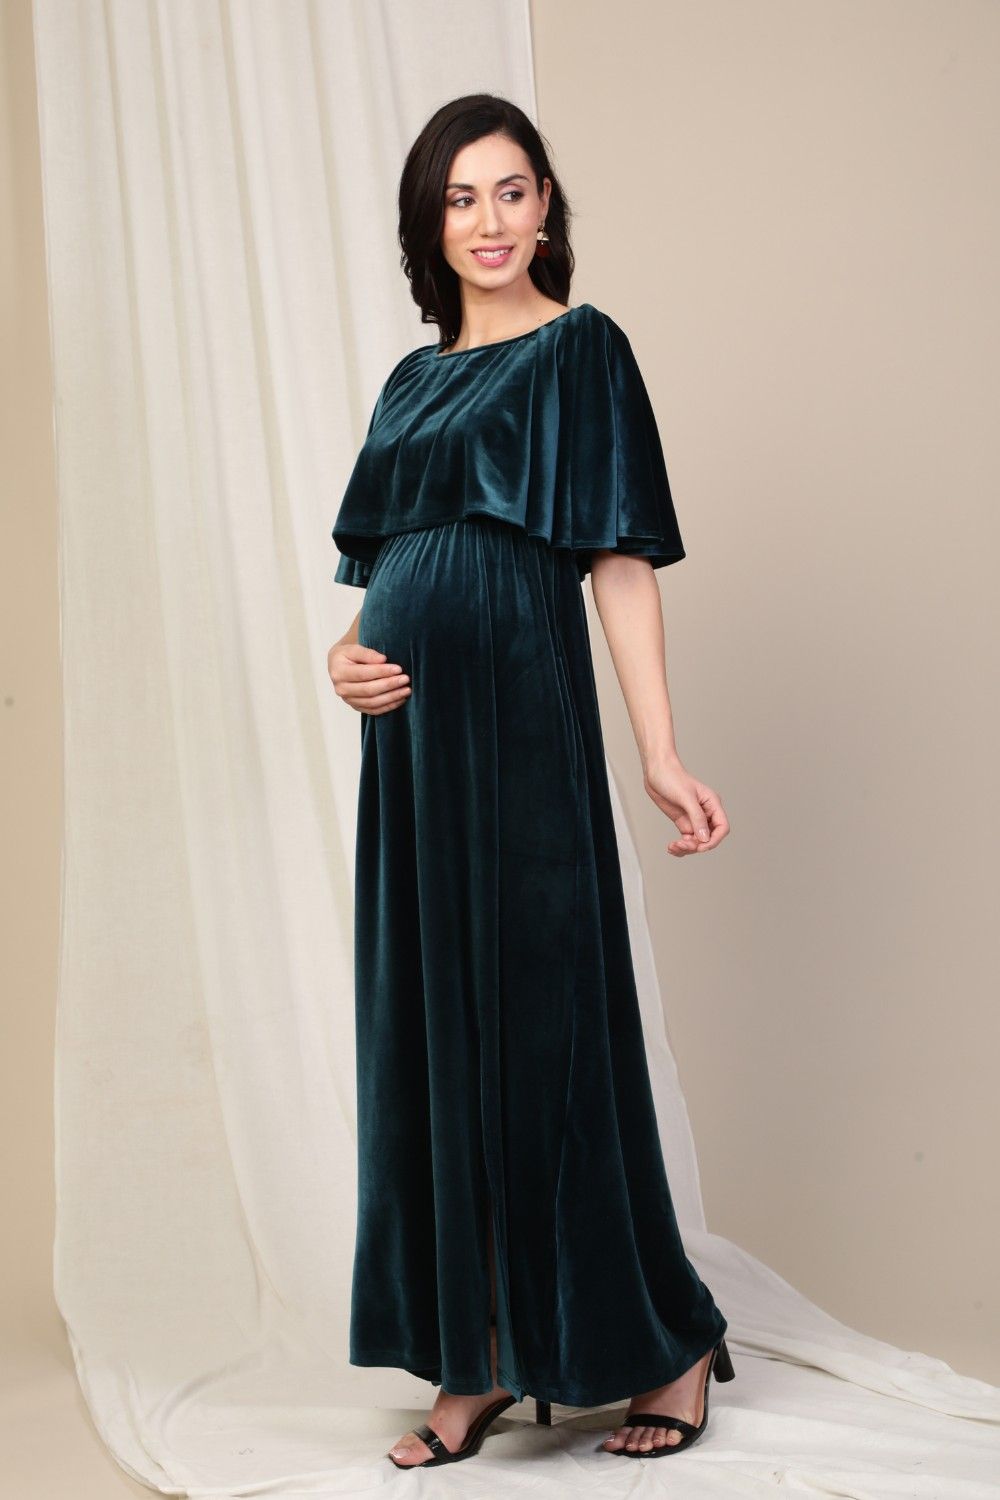 Elegant And Chic Maternity Dresses For
  Special Occasions